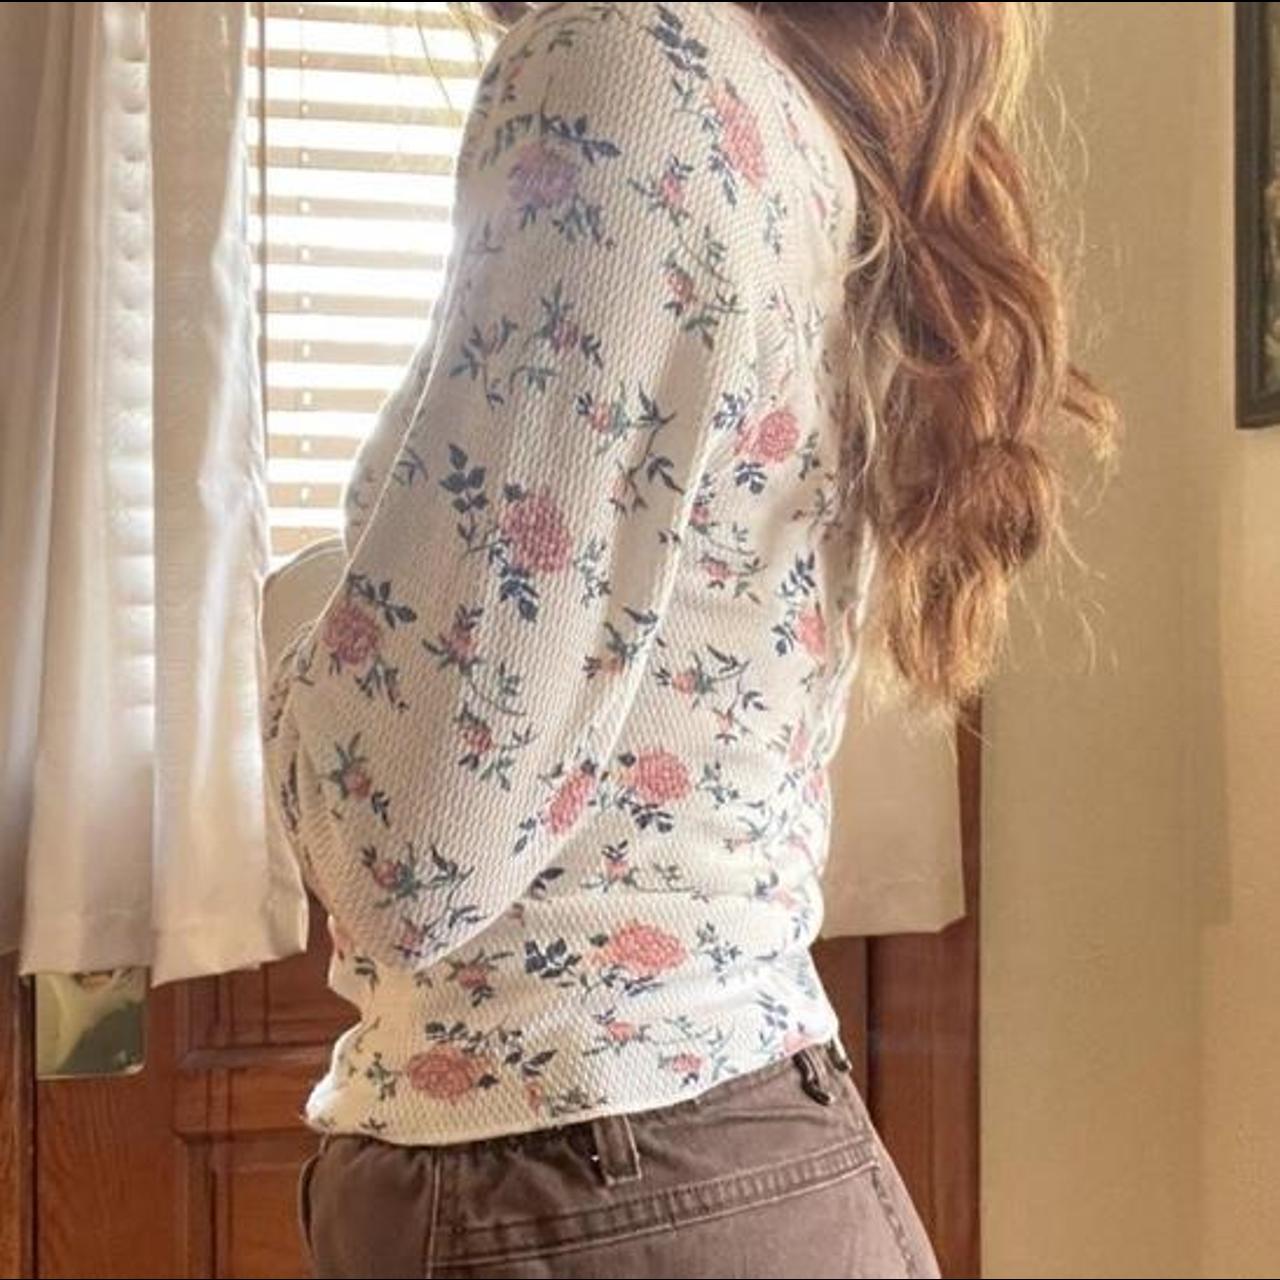 Product Image 2 - ˖⁺‧₊˚♡˚₊‧⁺˖lauren brooke white floral thermal